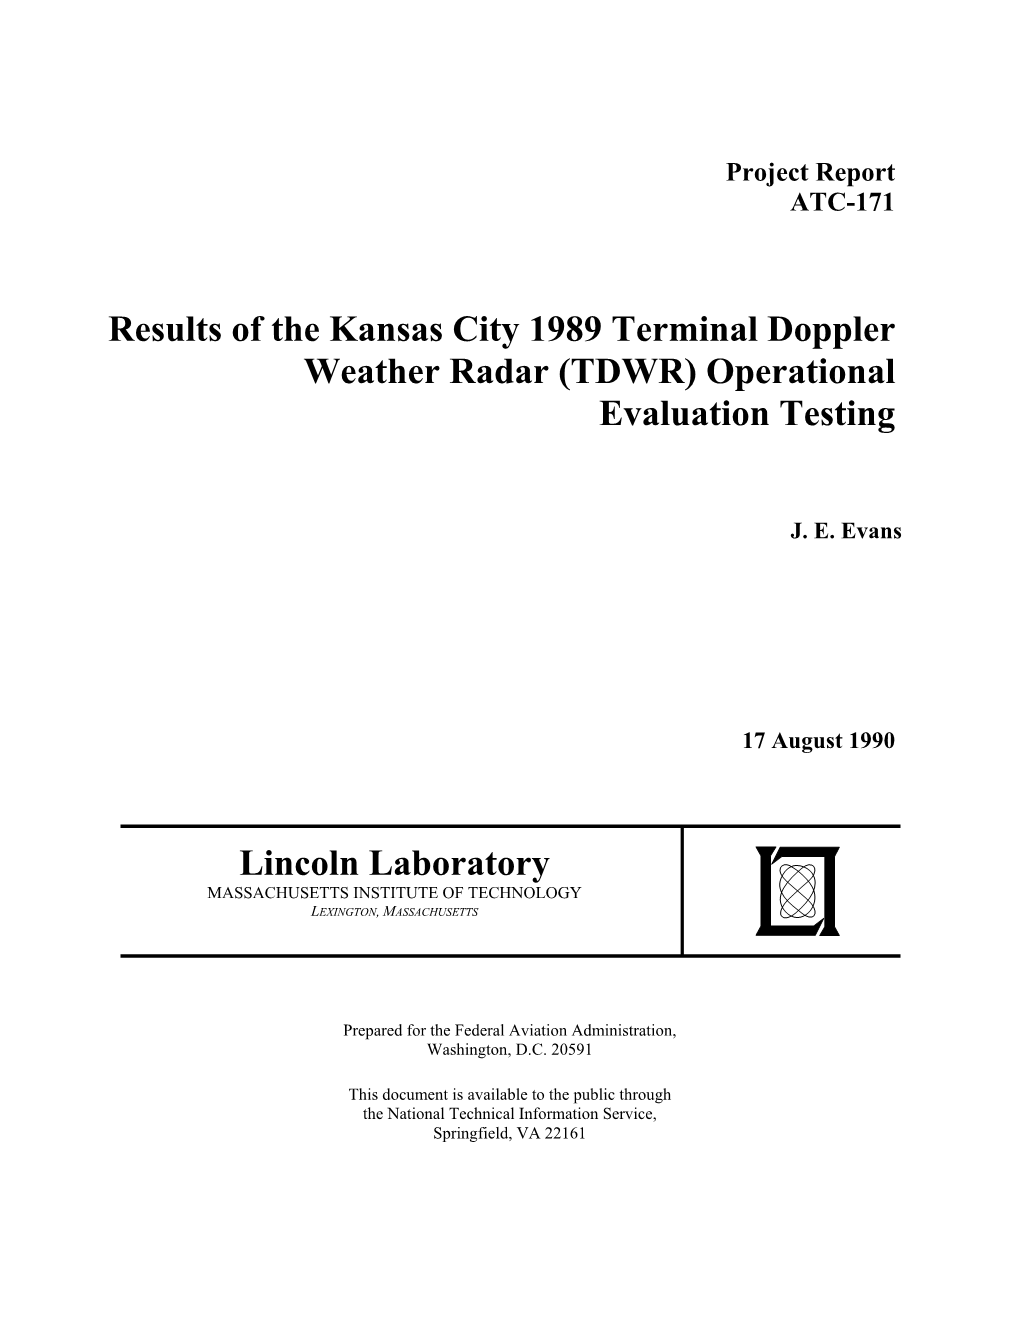 Results of the Kansas City 1989 Terminal Doppler Weather Radar 17 August 1990 (TDWR) Operational Evaluation Testing 6